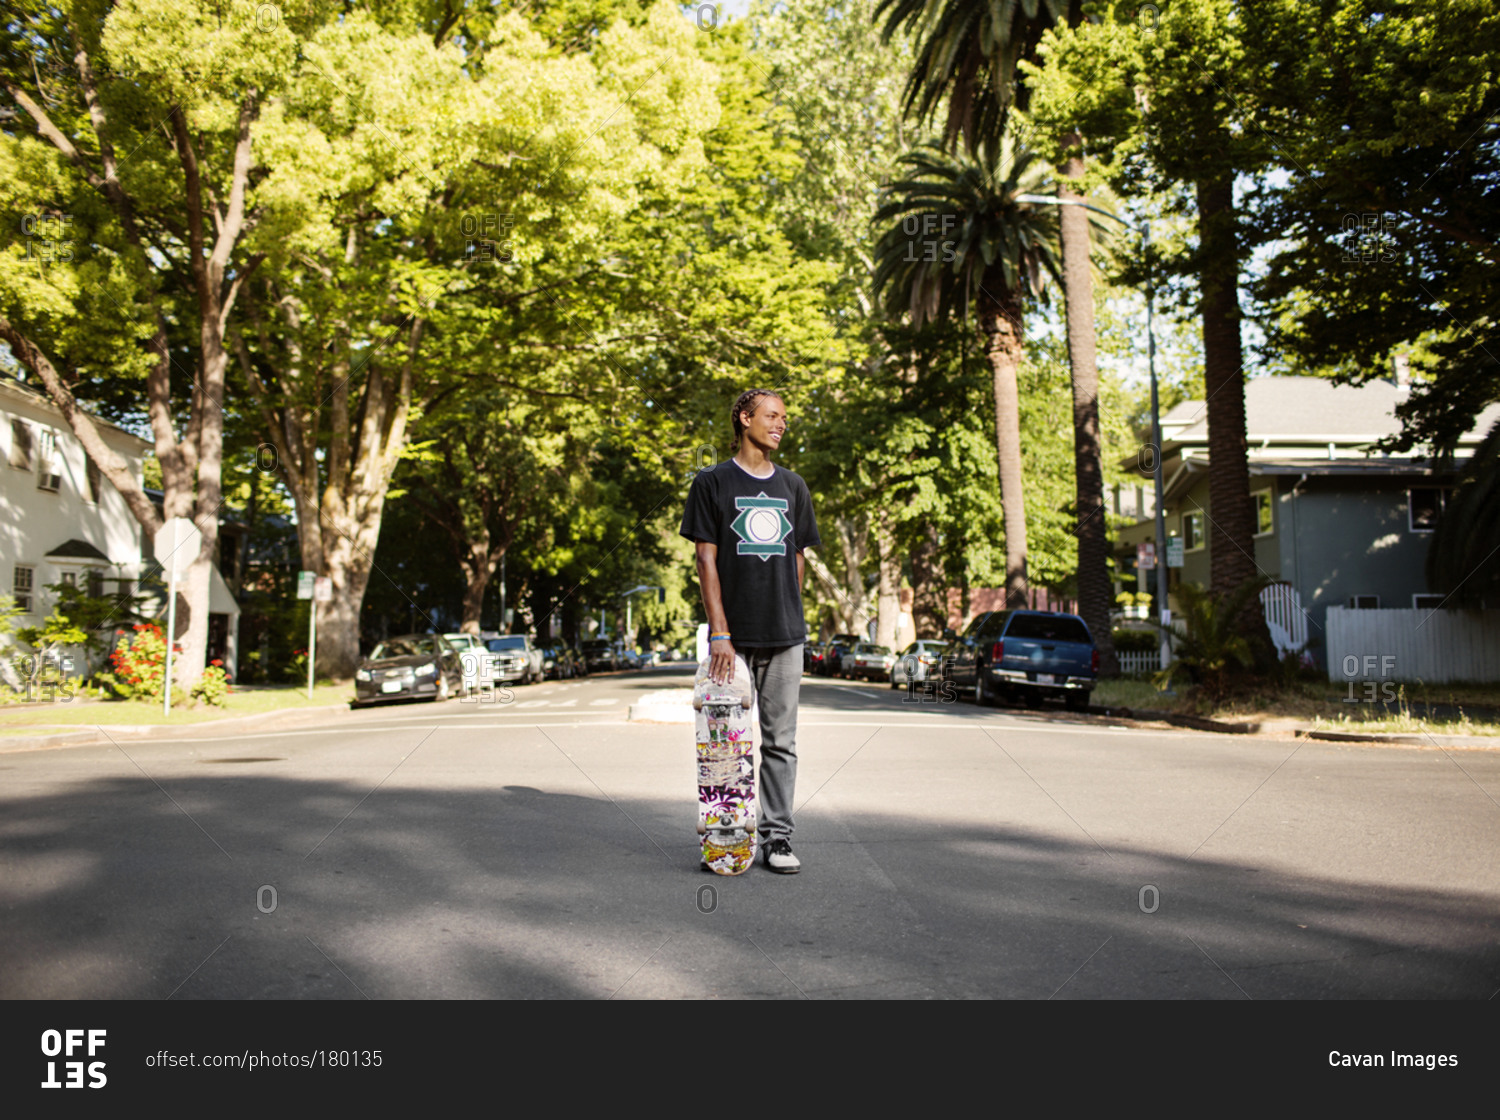 A young man stands in the street holding a skateboard